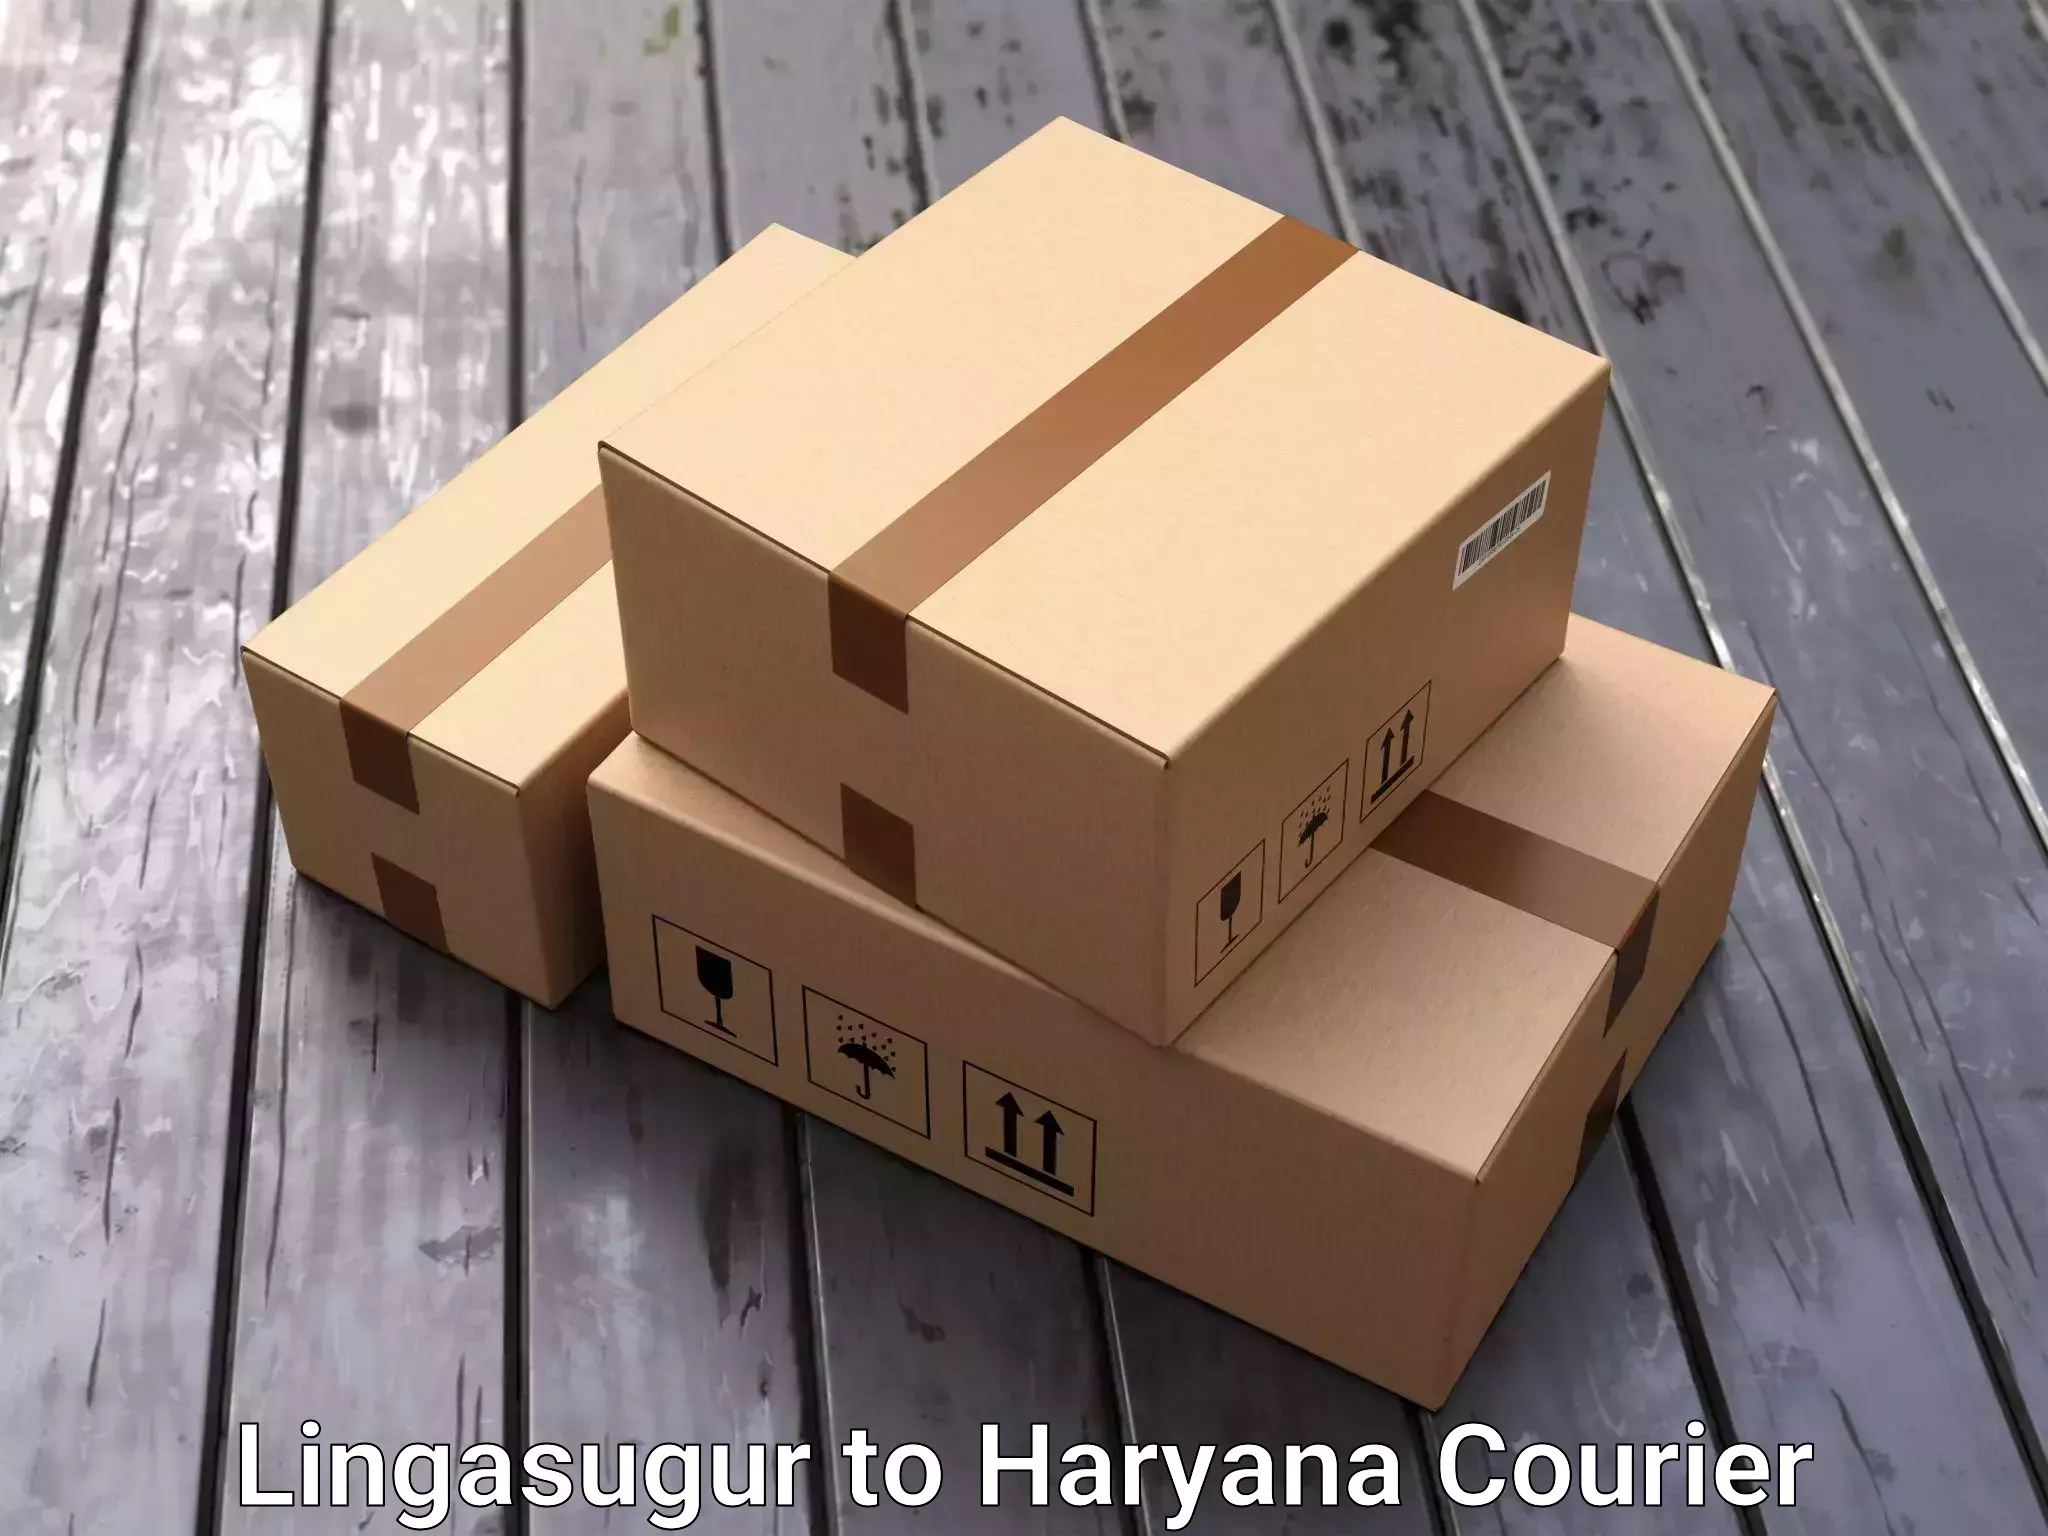 Moving and handling services in Lingasugur to Haryana